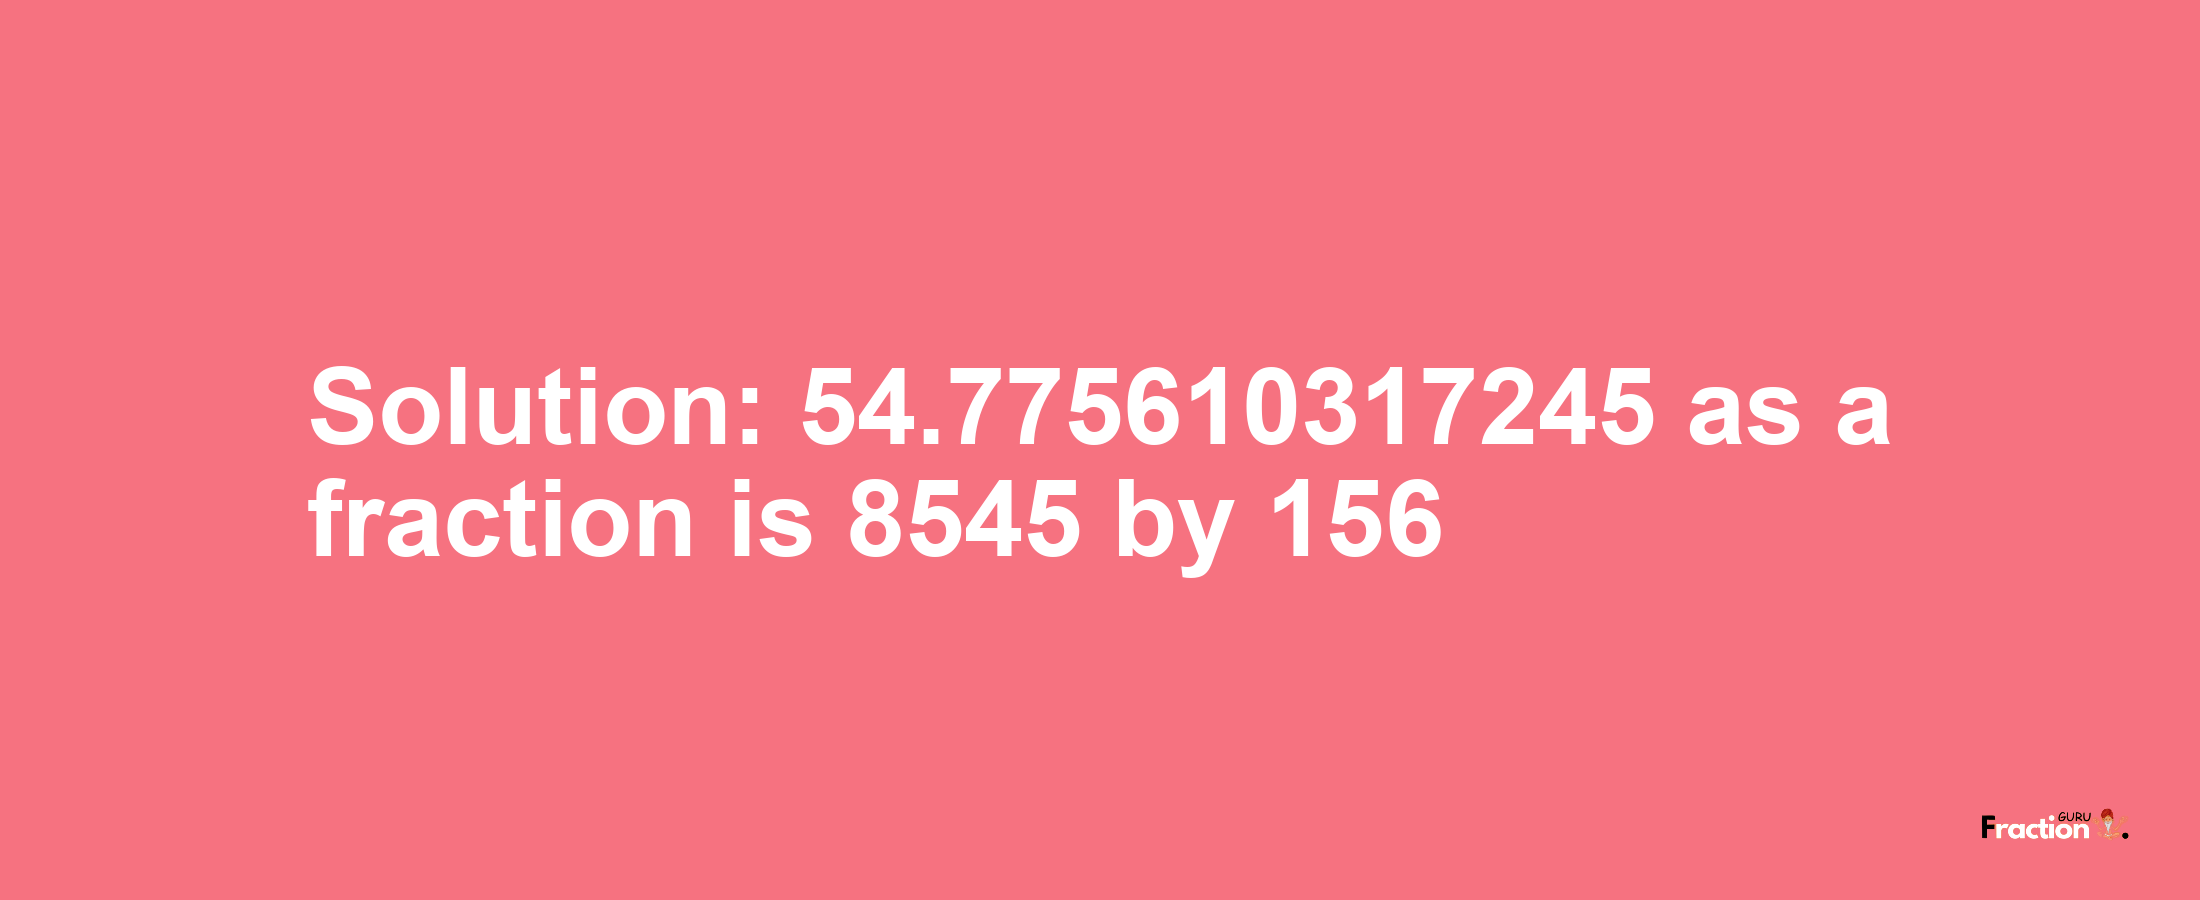 Solution:54.775610317245 as a fraction is 8545/156